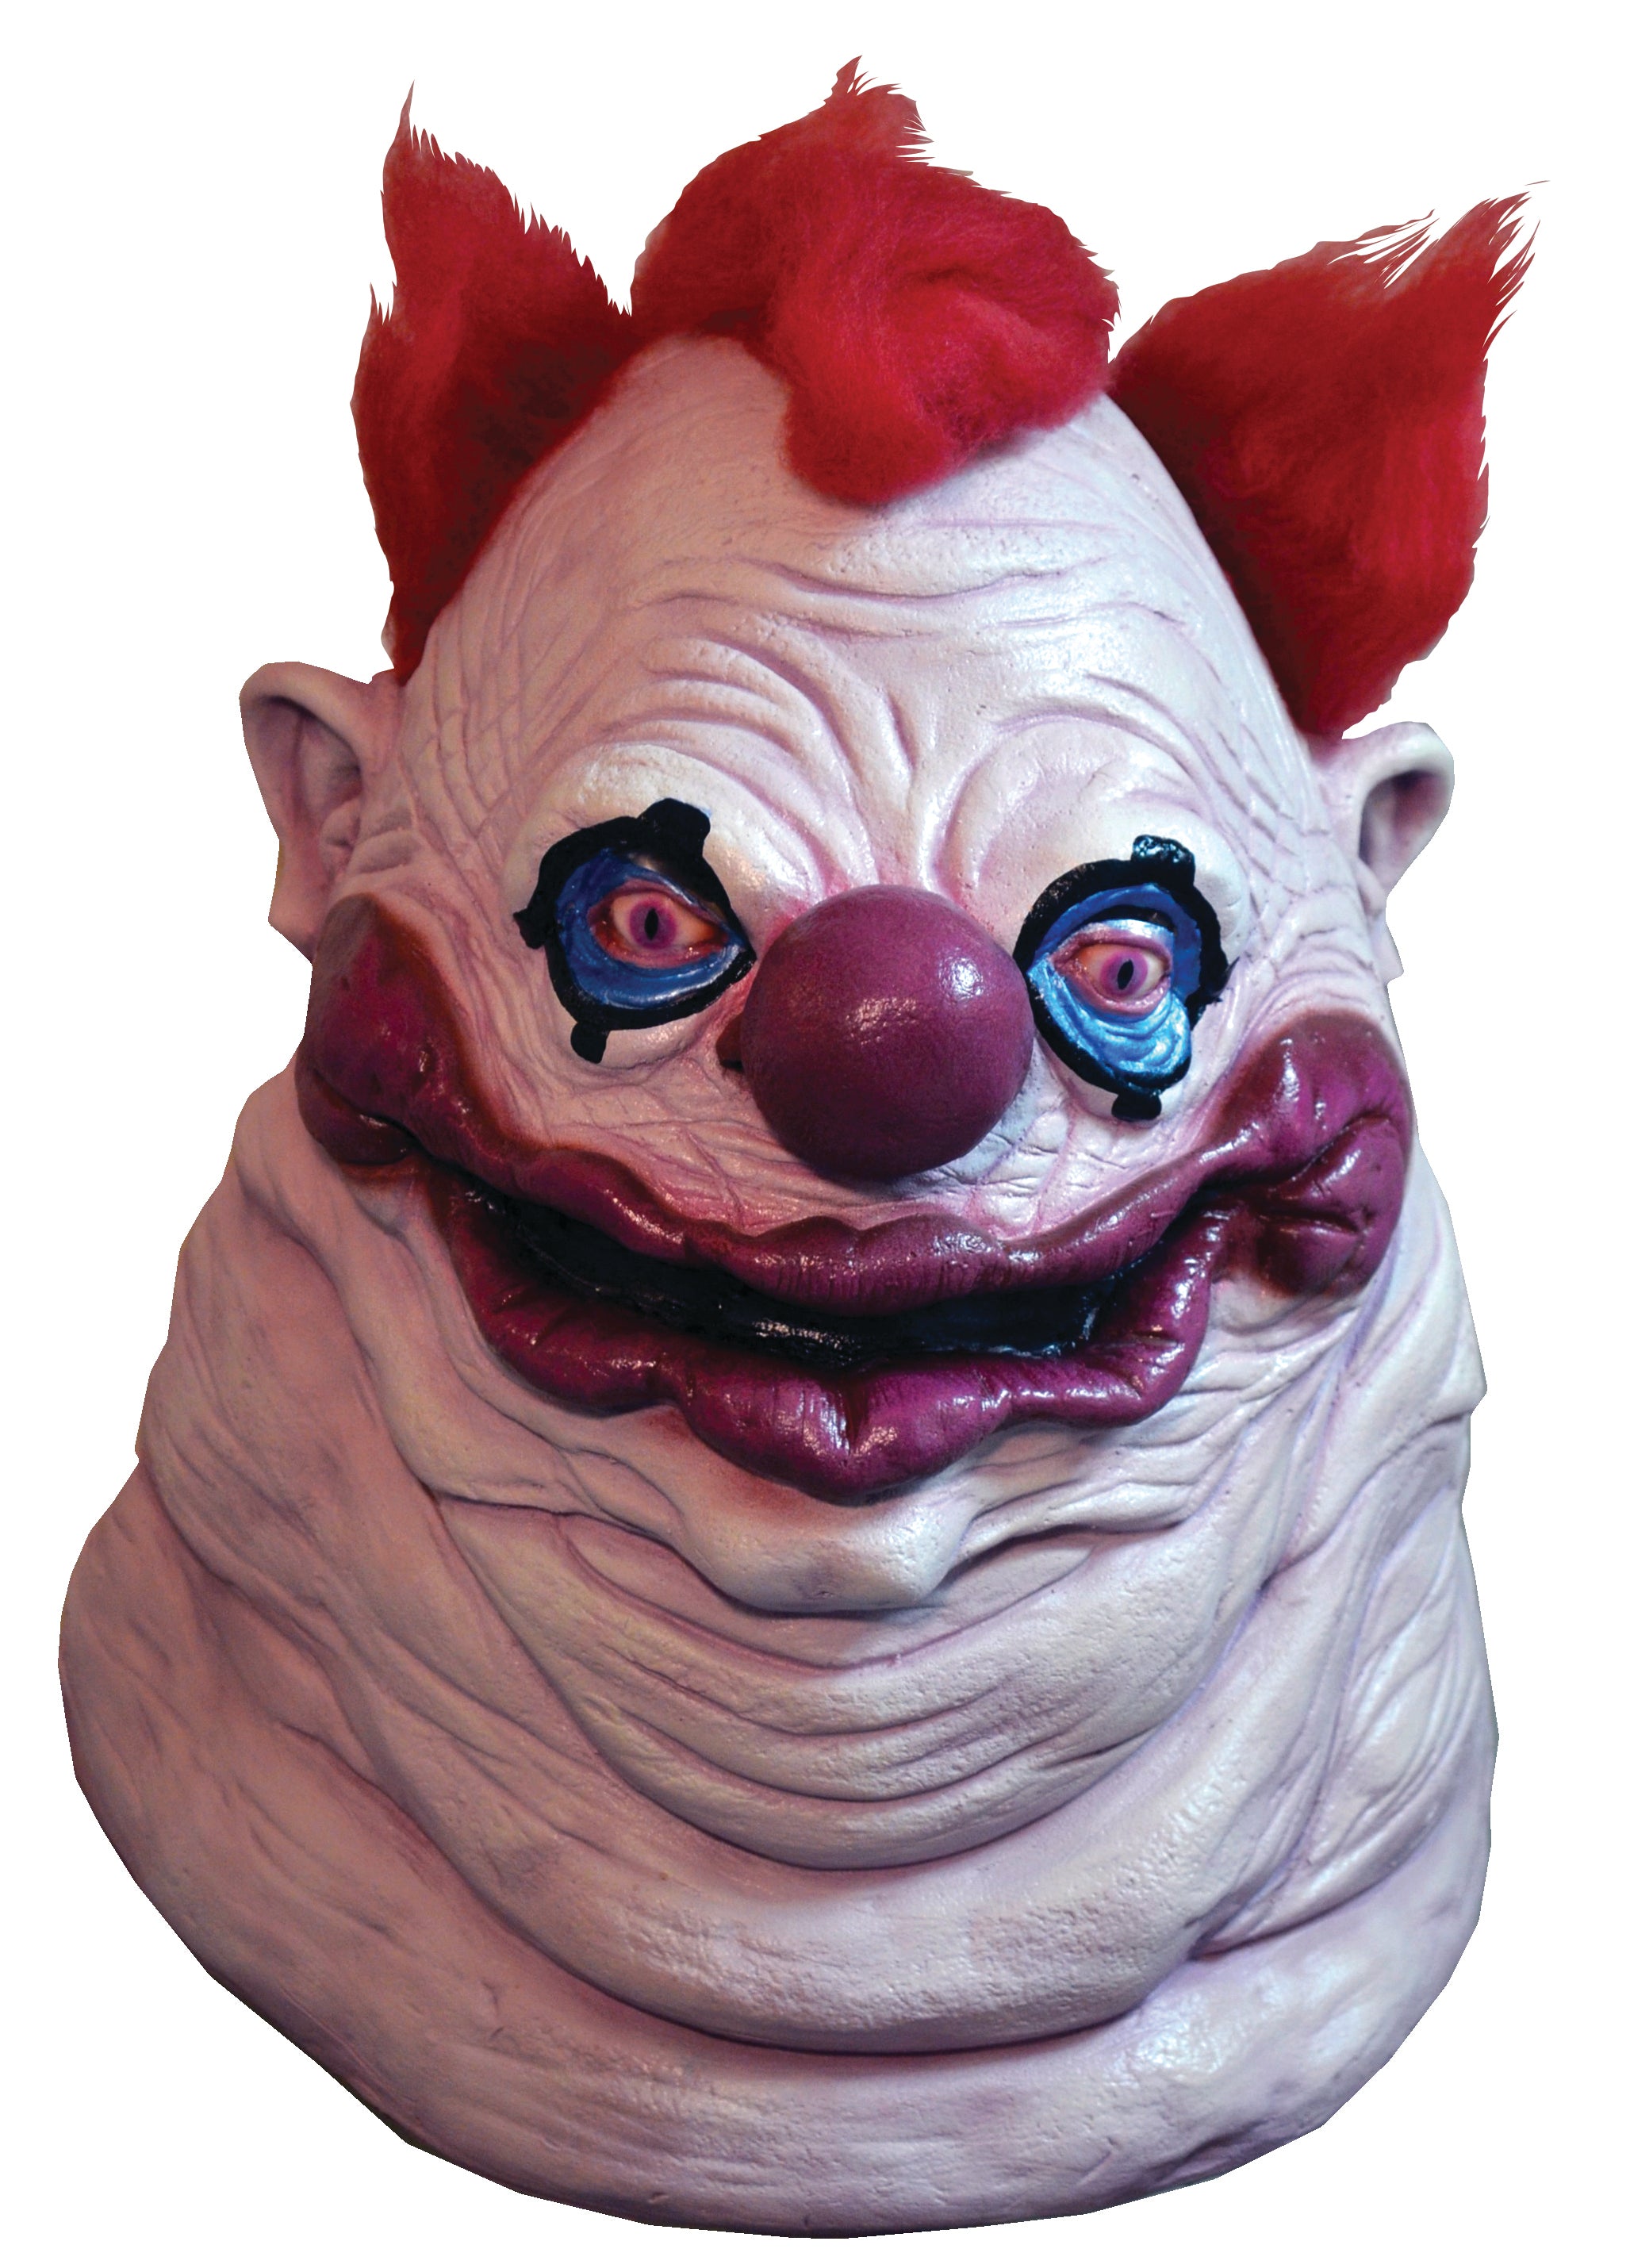 Killer Klowns From Outer Space - Fatso Mask